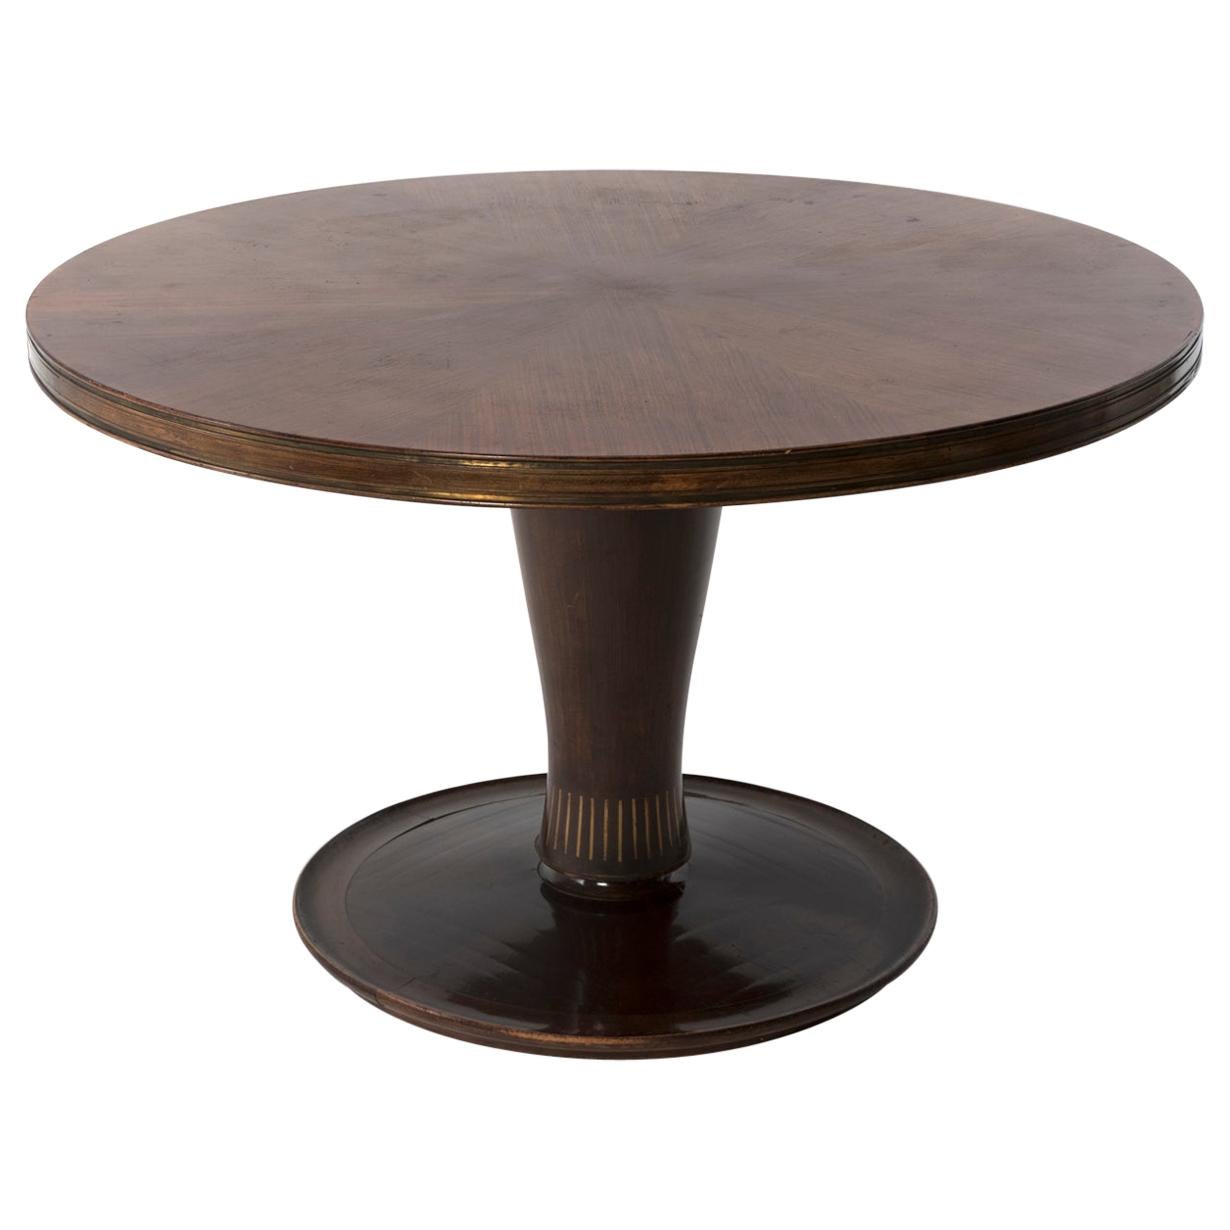 1950 Round Dining Table by Giovanni Gariboldi for Colli in Bubinga Wood